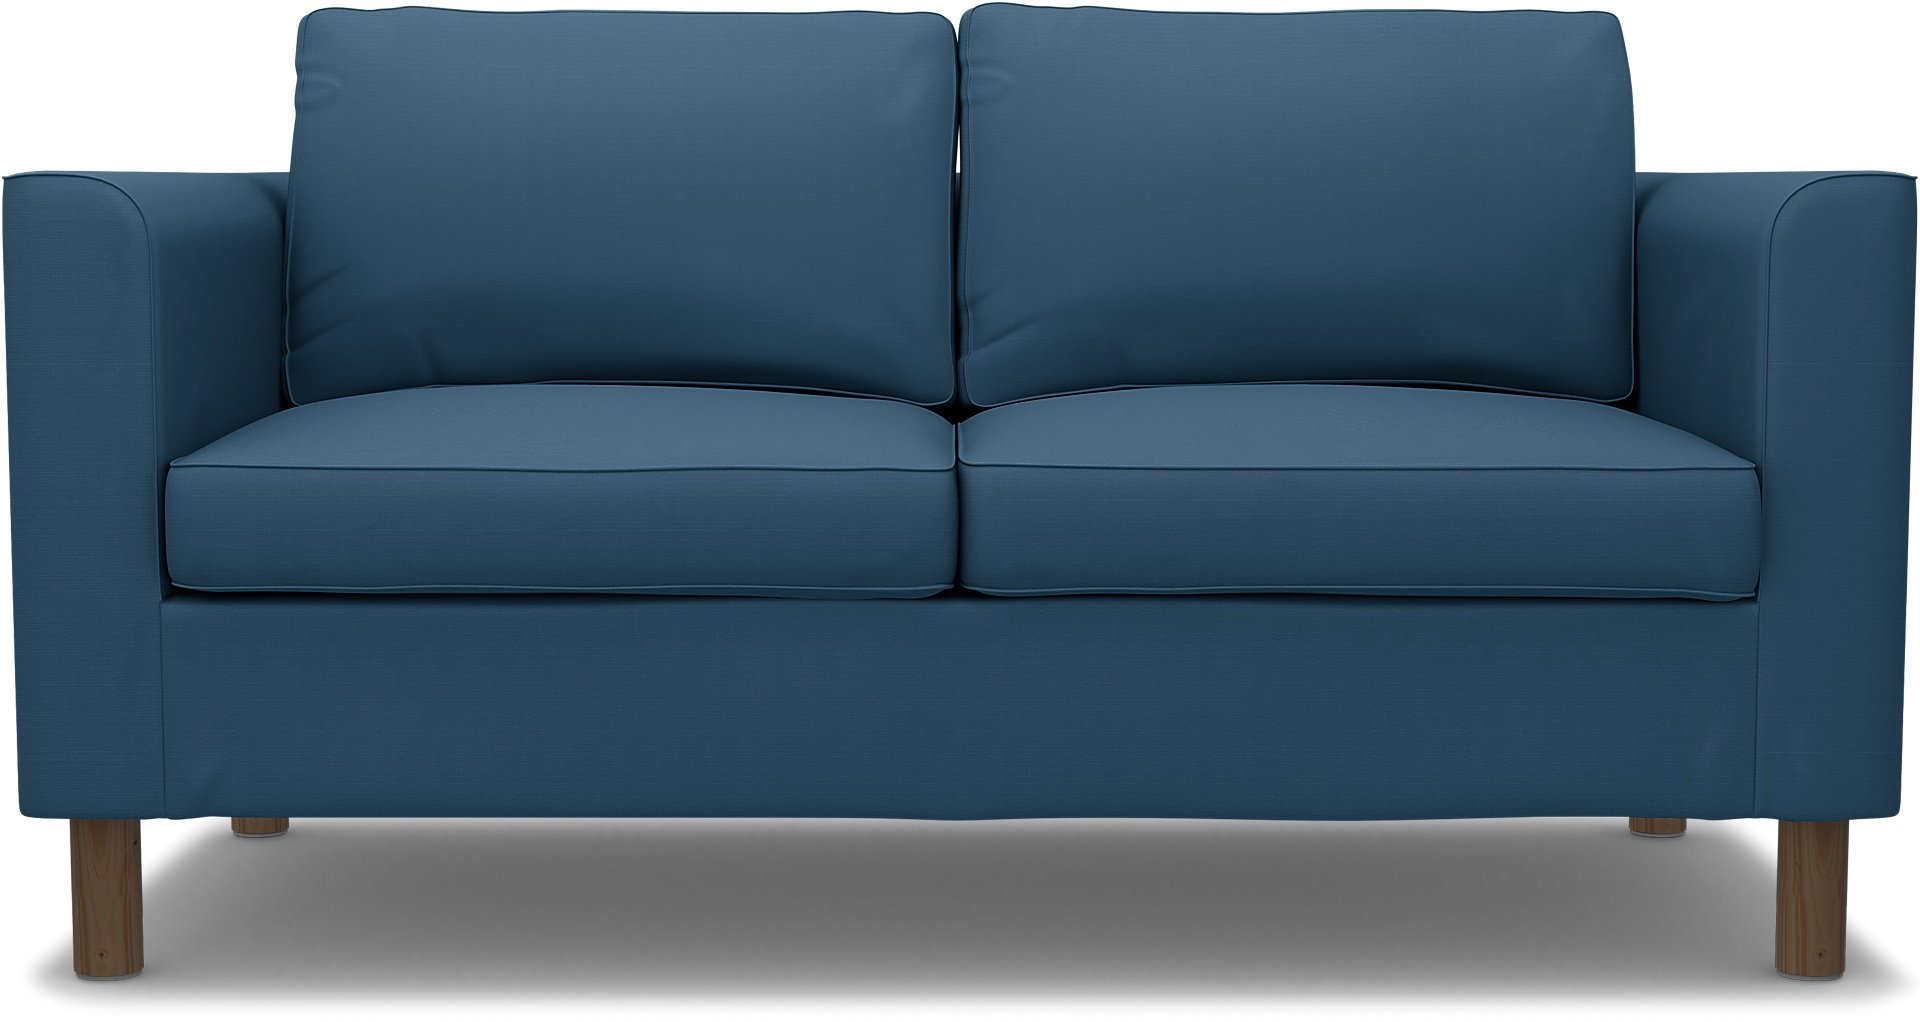 IKEA - Parup 2 Seater, Real Teal, Cotton - Bemz